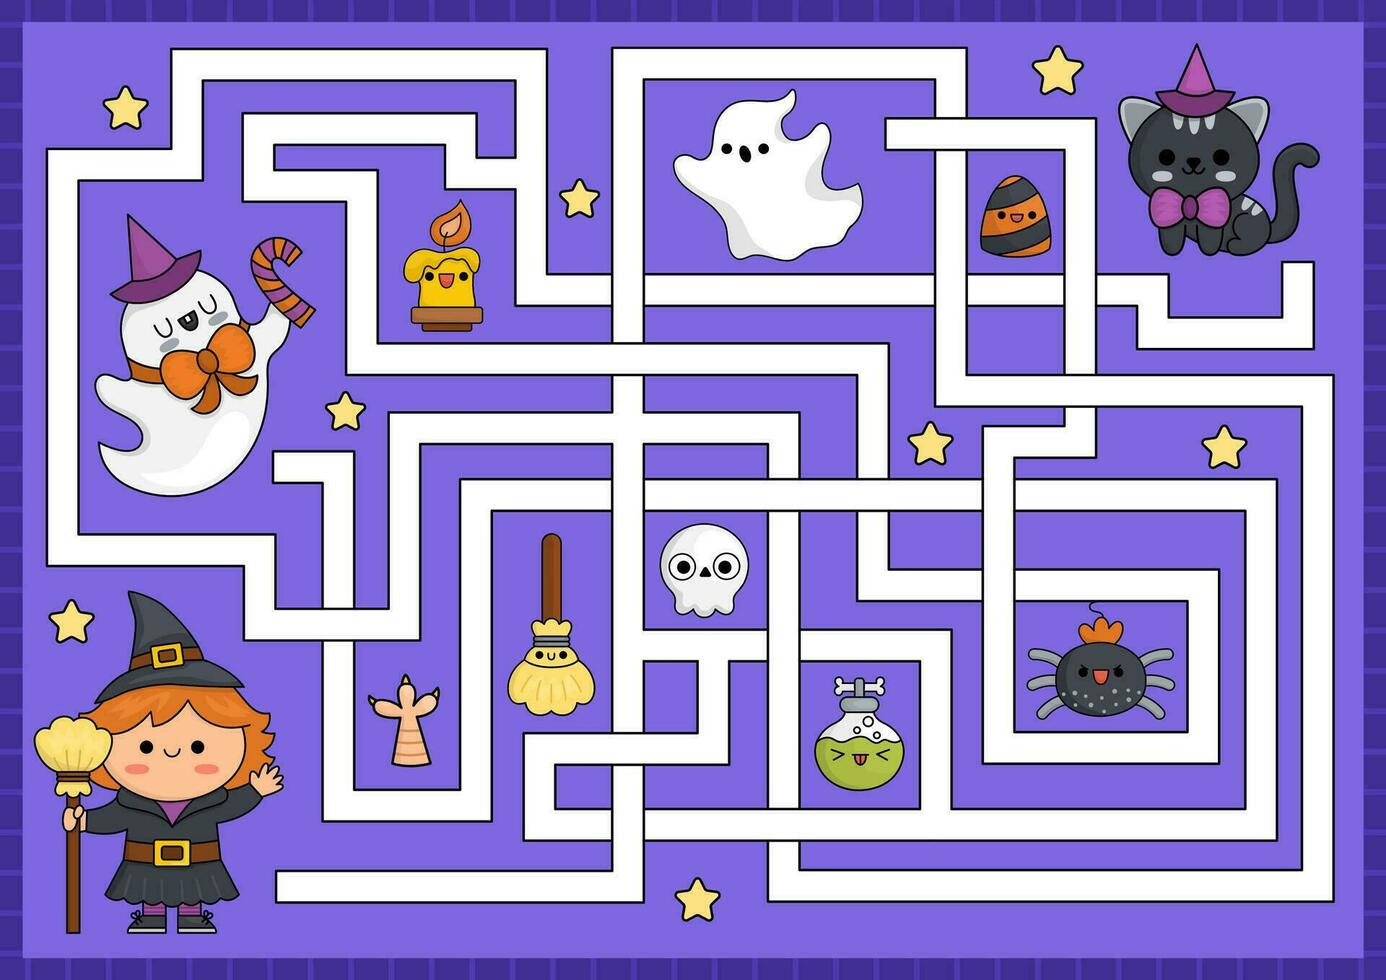 Halloween maze for kids. Autumn holiday preschool printable activity with cute kawaii witch, cat, ghost. Scary labyrinth game or puzzle with cute characters. All saints day worksheet for children vector